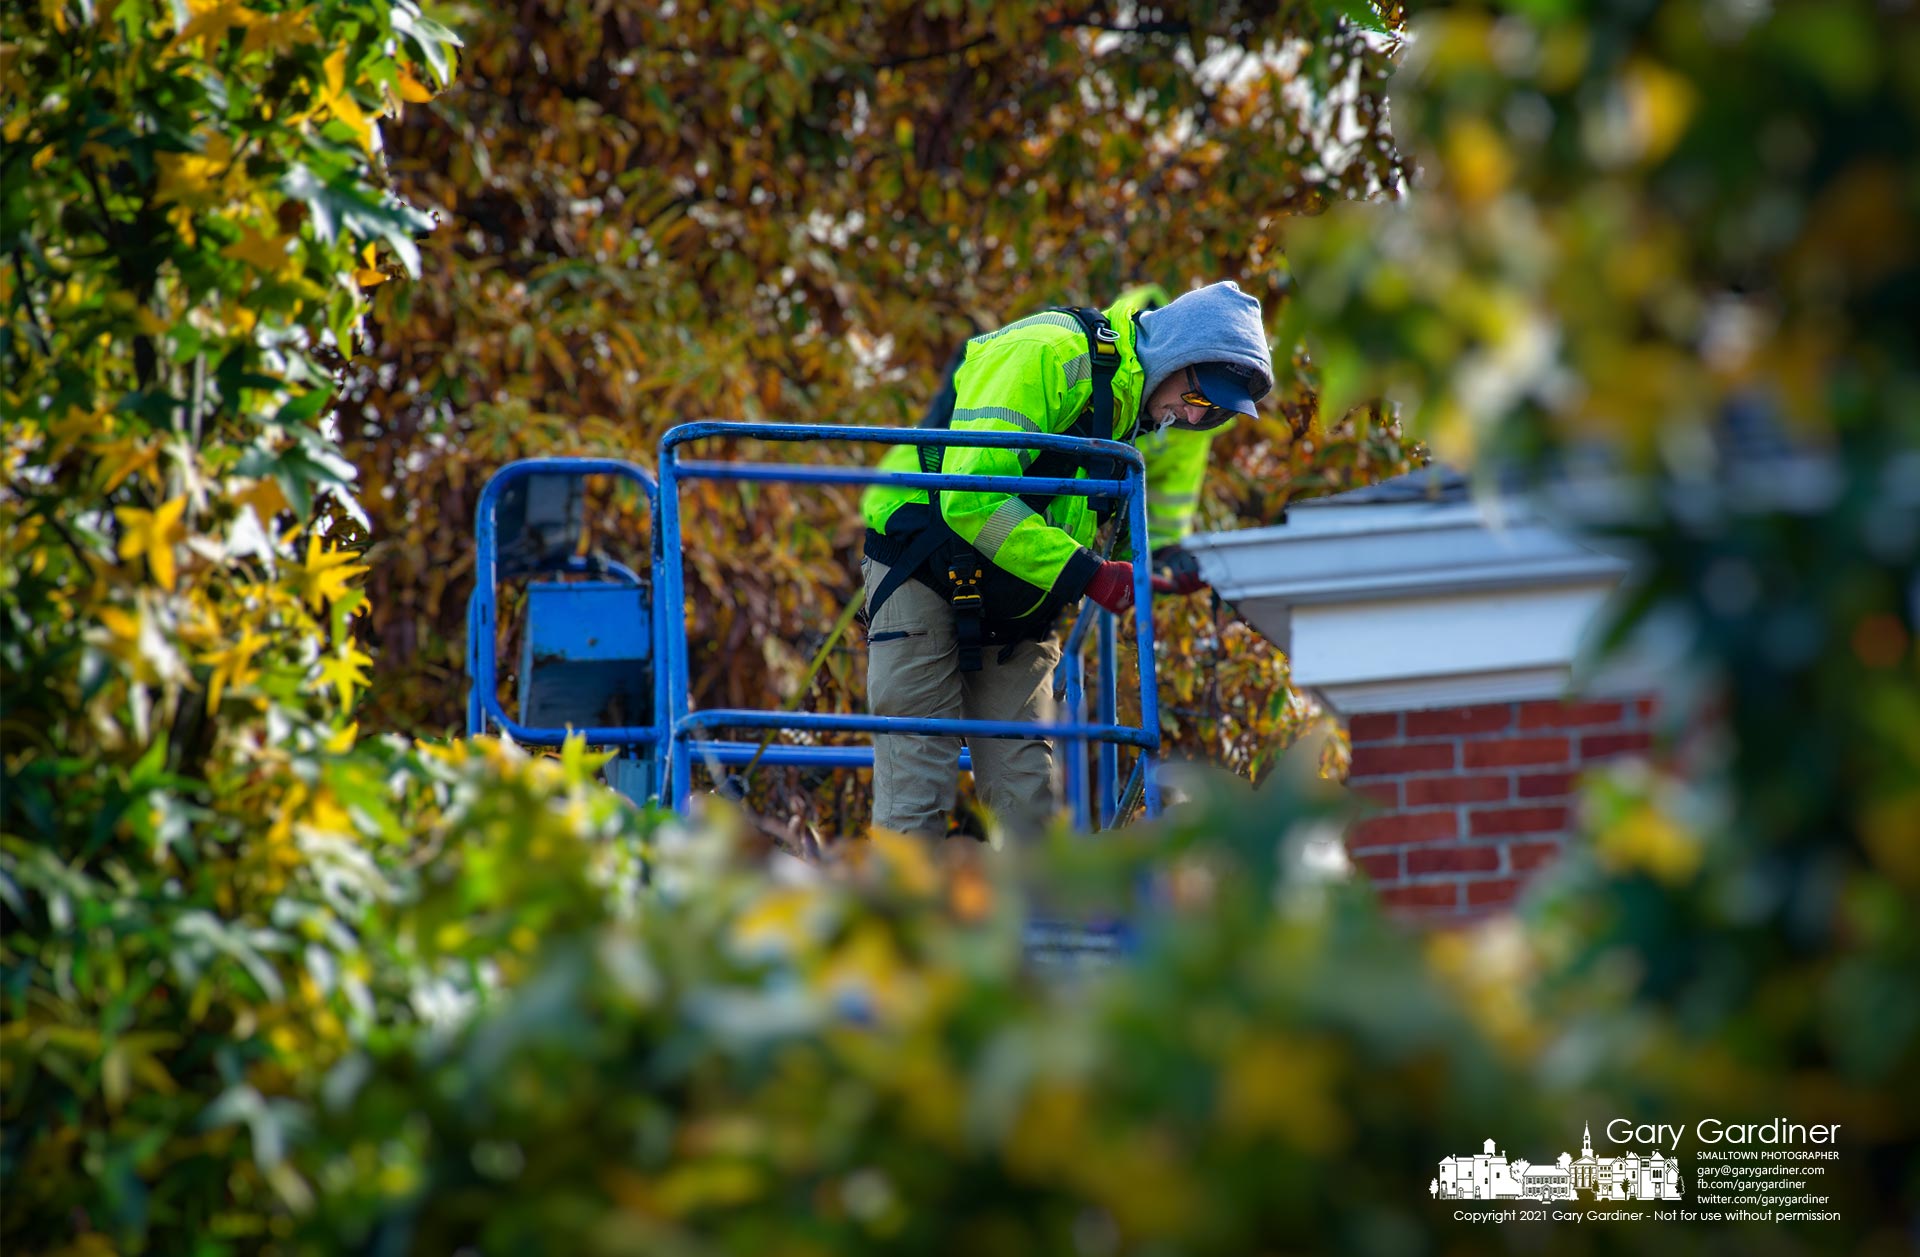 A Westerville Parks worker installs strings of led lights in the eaves of City Hall preparing the building and its landscape for the holiday tree lighting in December. My Final Photo for Nov. 12, 2021.